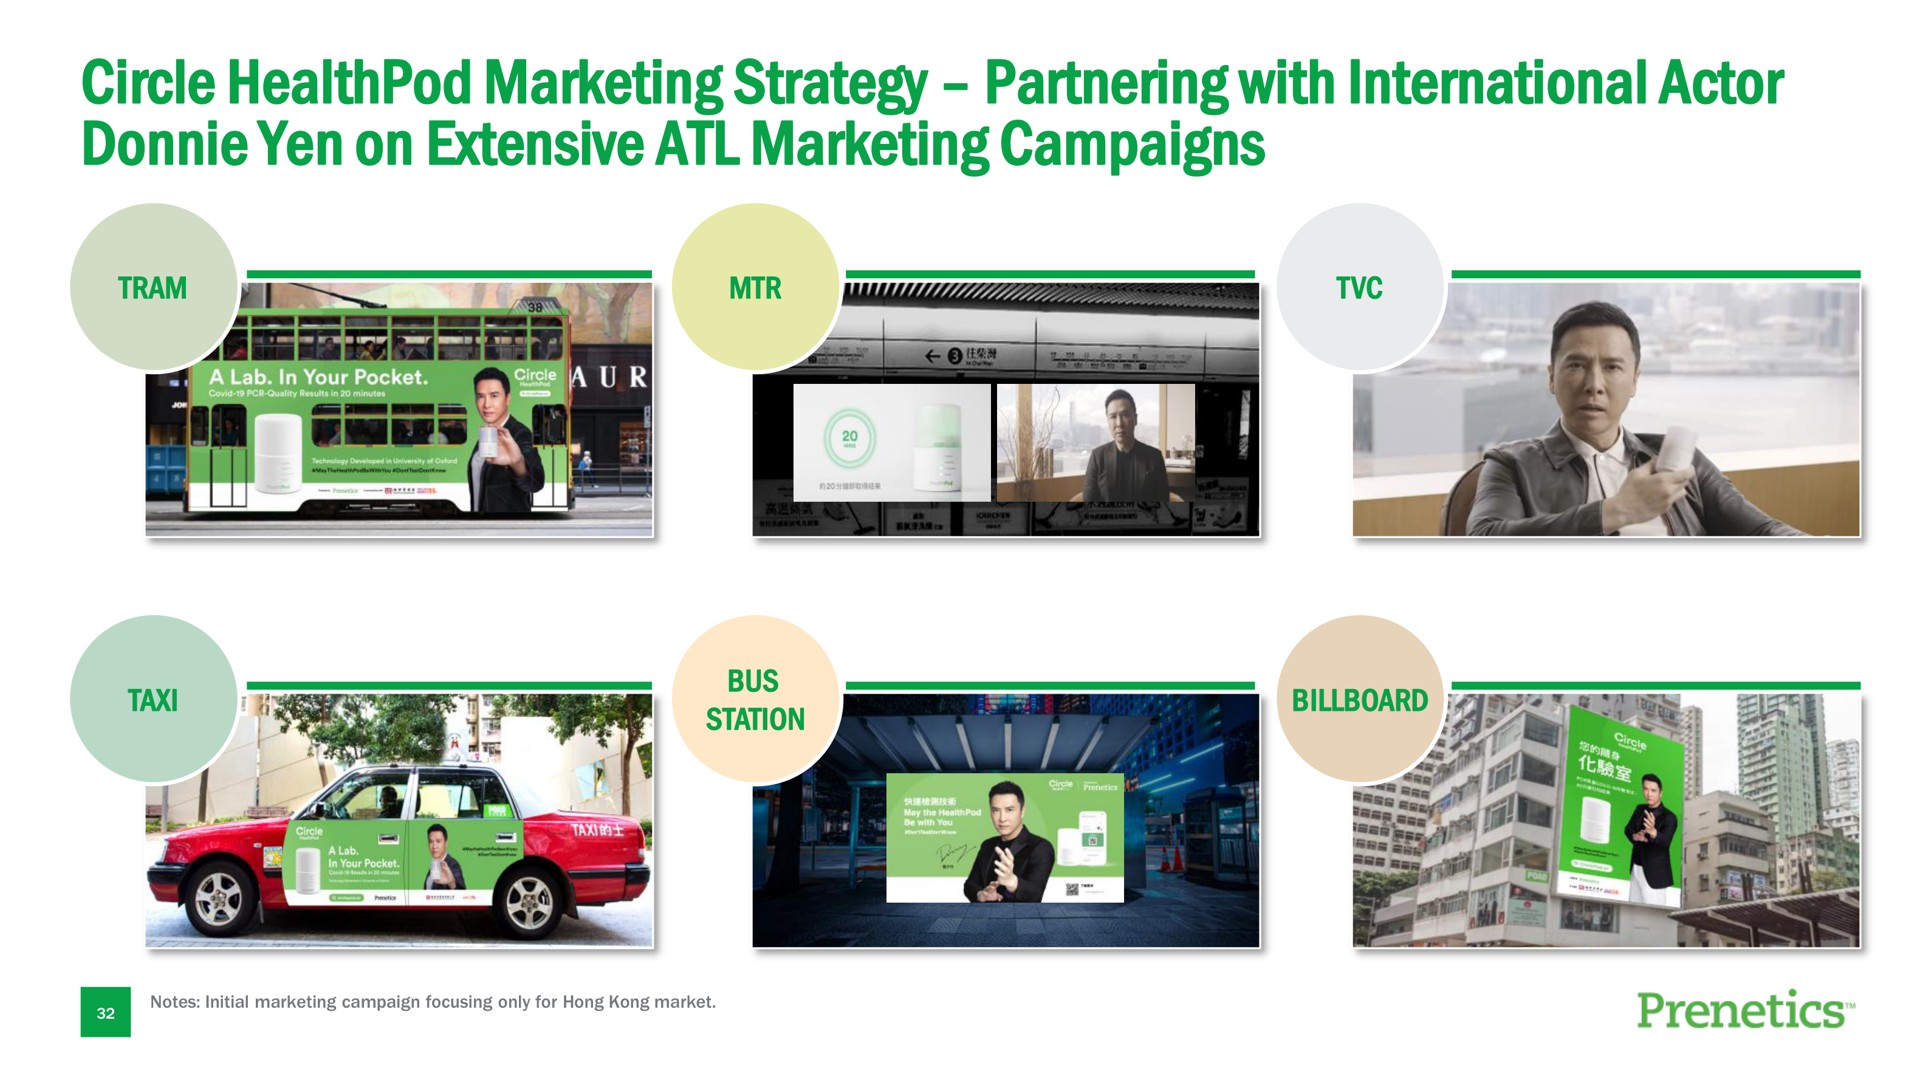 circle marketing strategy partnering with international actor yen on extensive marketing campaigns | Prenetics